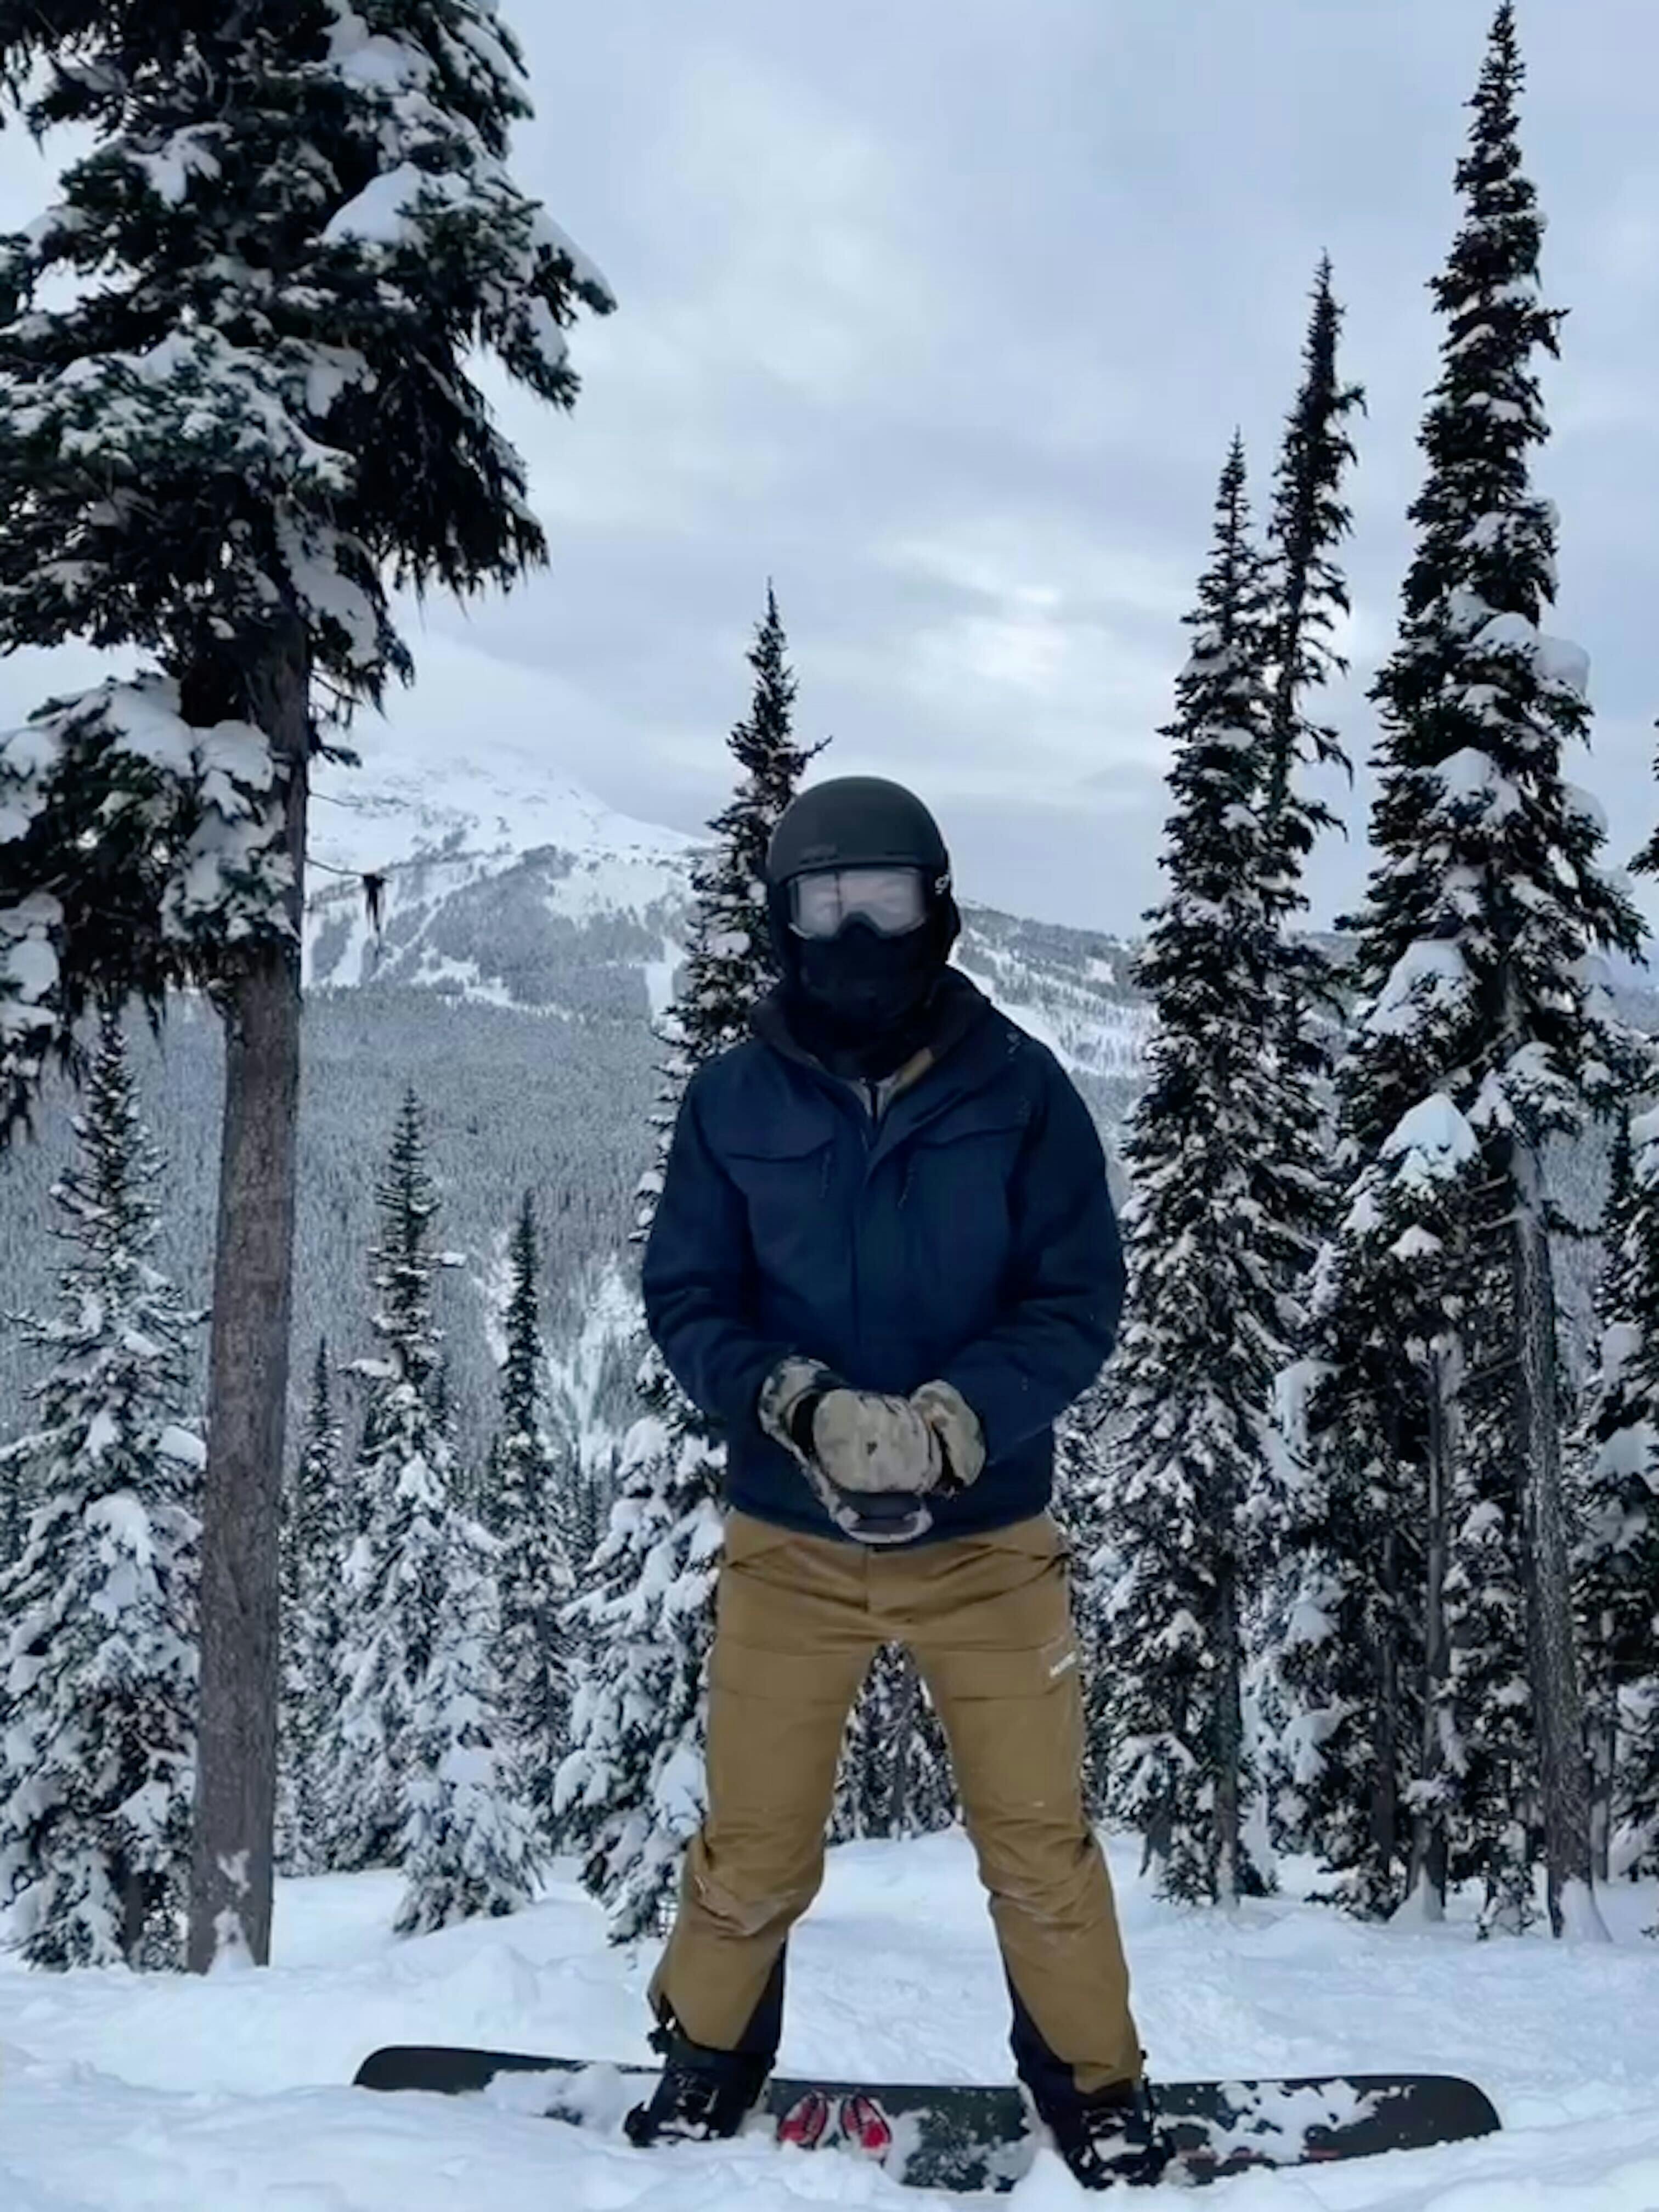 A snowboarder on the Arbor Spruce Snowboard Bindings.